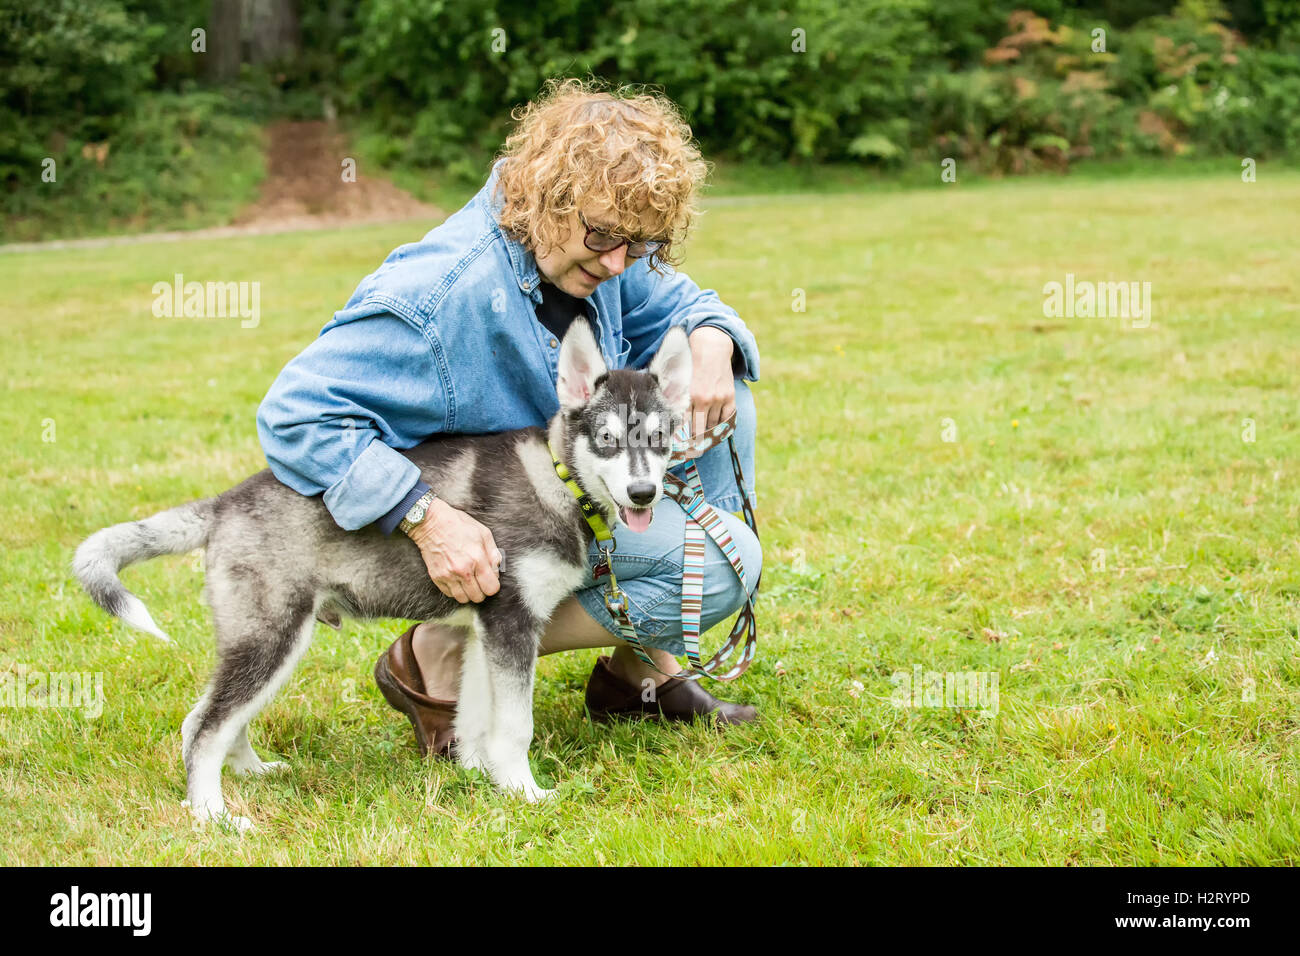 Dashiell, a three month old Alaskan Malamute puppy being praised by and getting affection from his owner in Issaquah, Washington Stock Photo